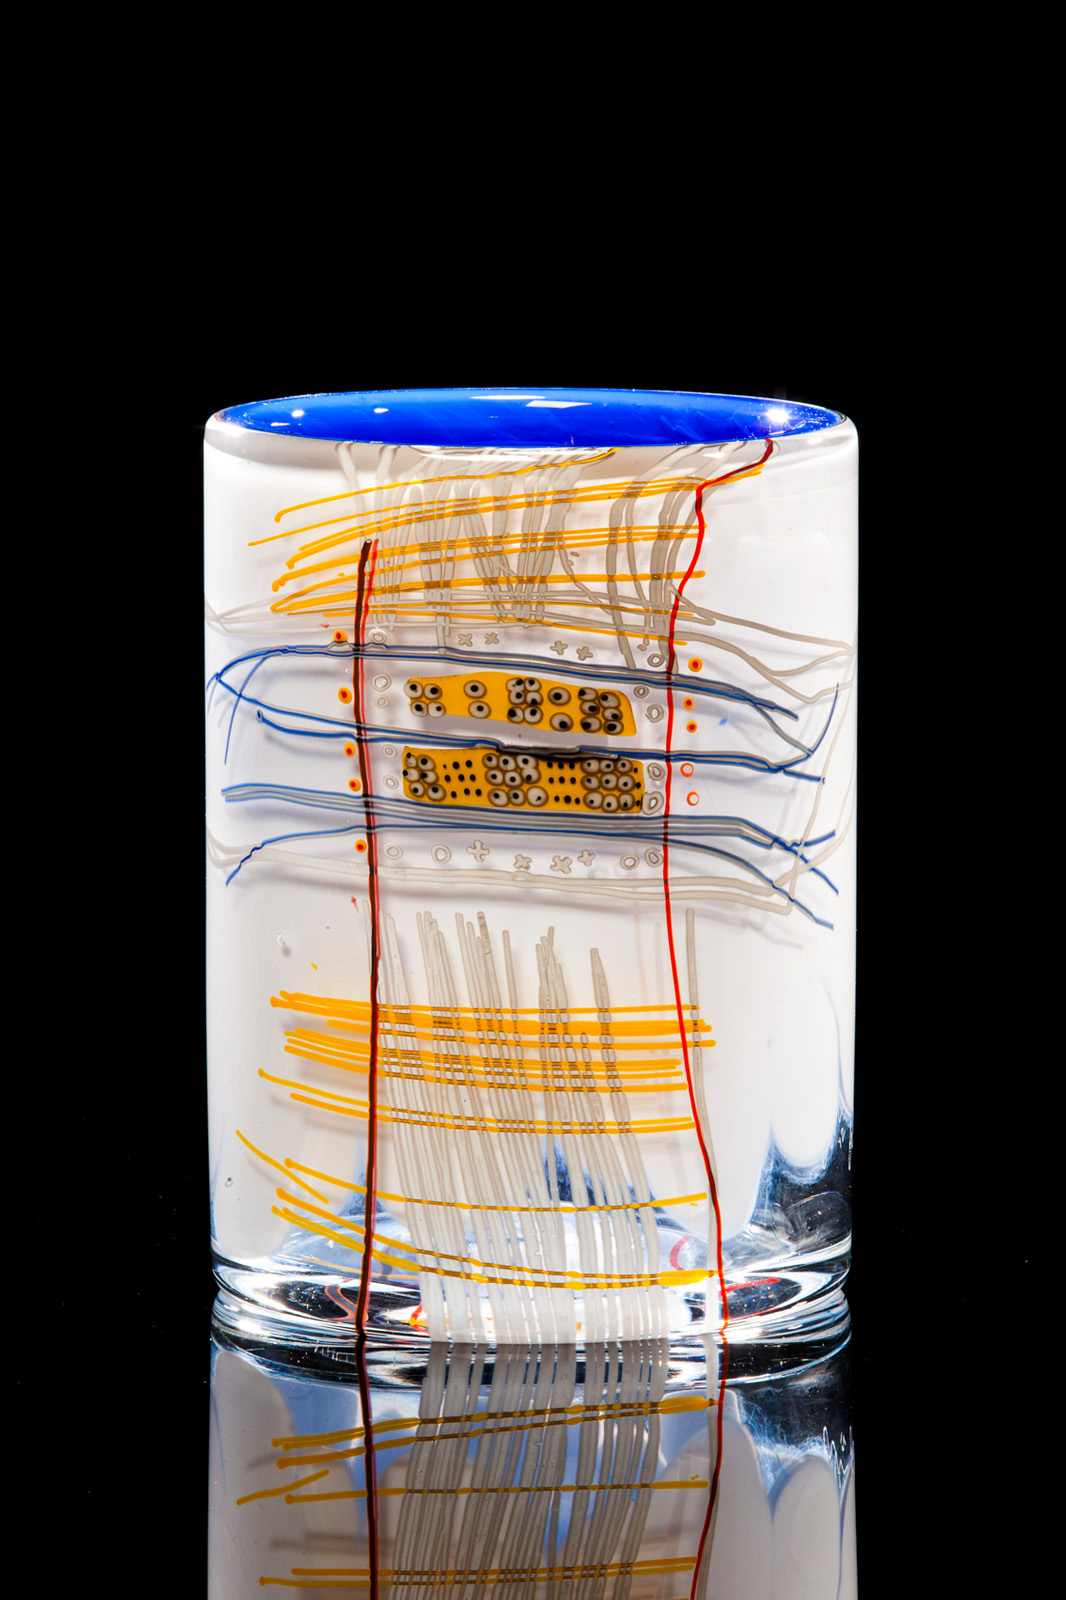 Dale Chihuly, Lapis White Cylinder with Drawing, 2012